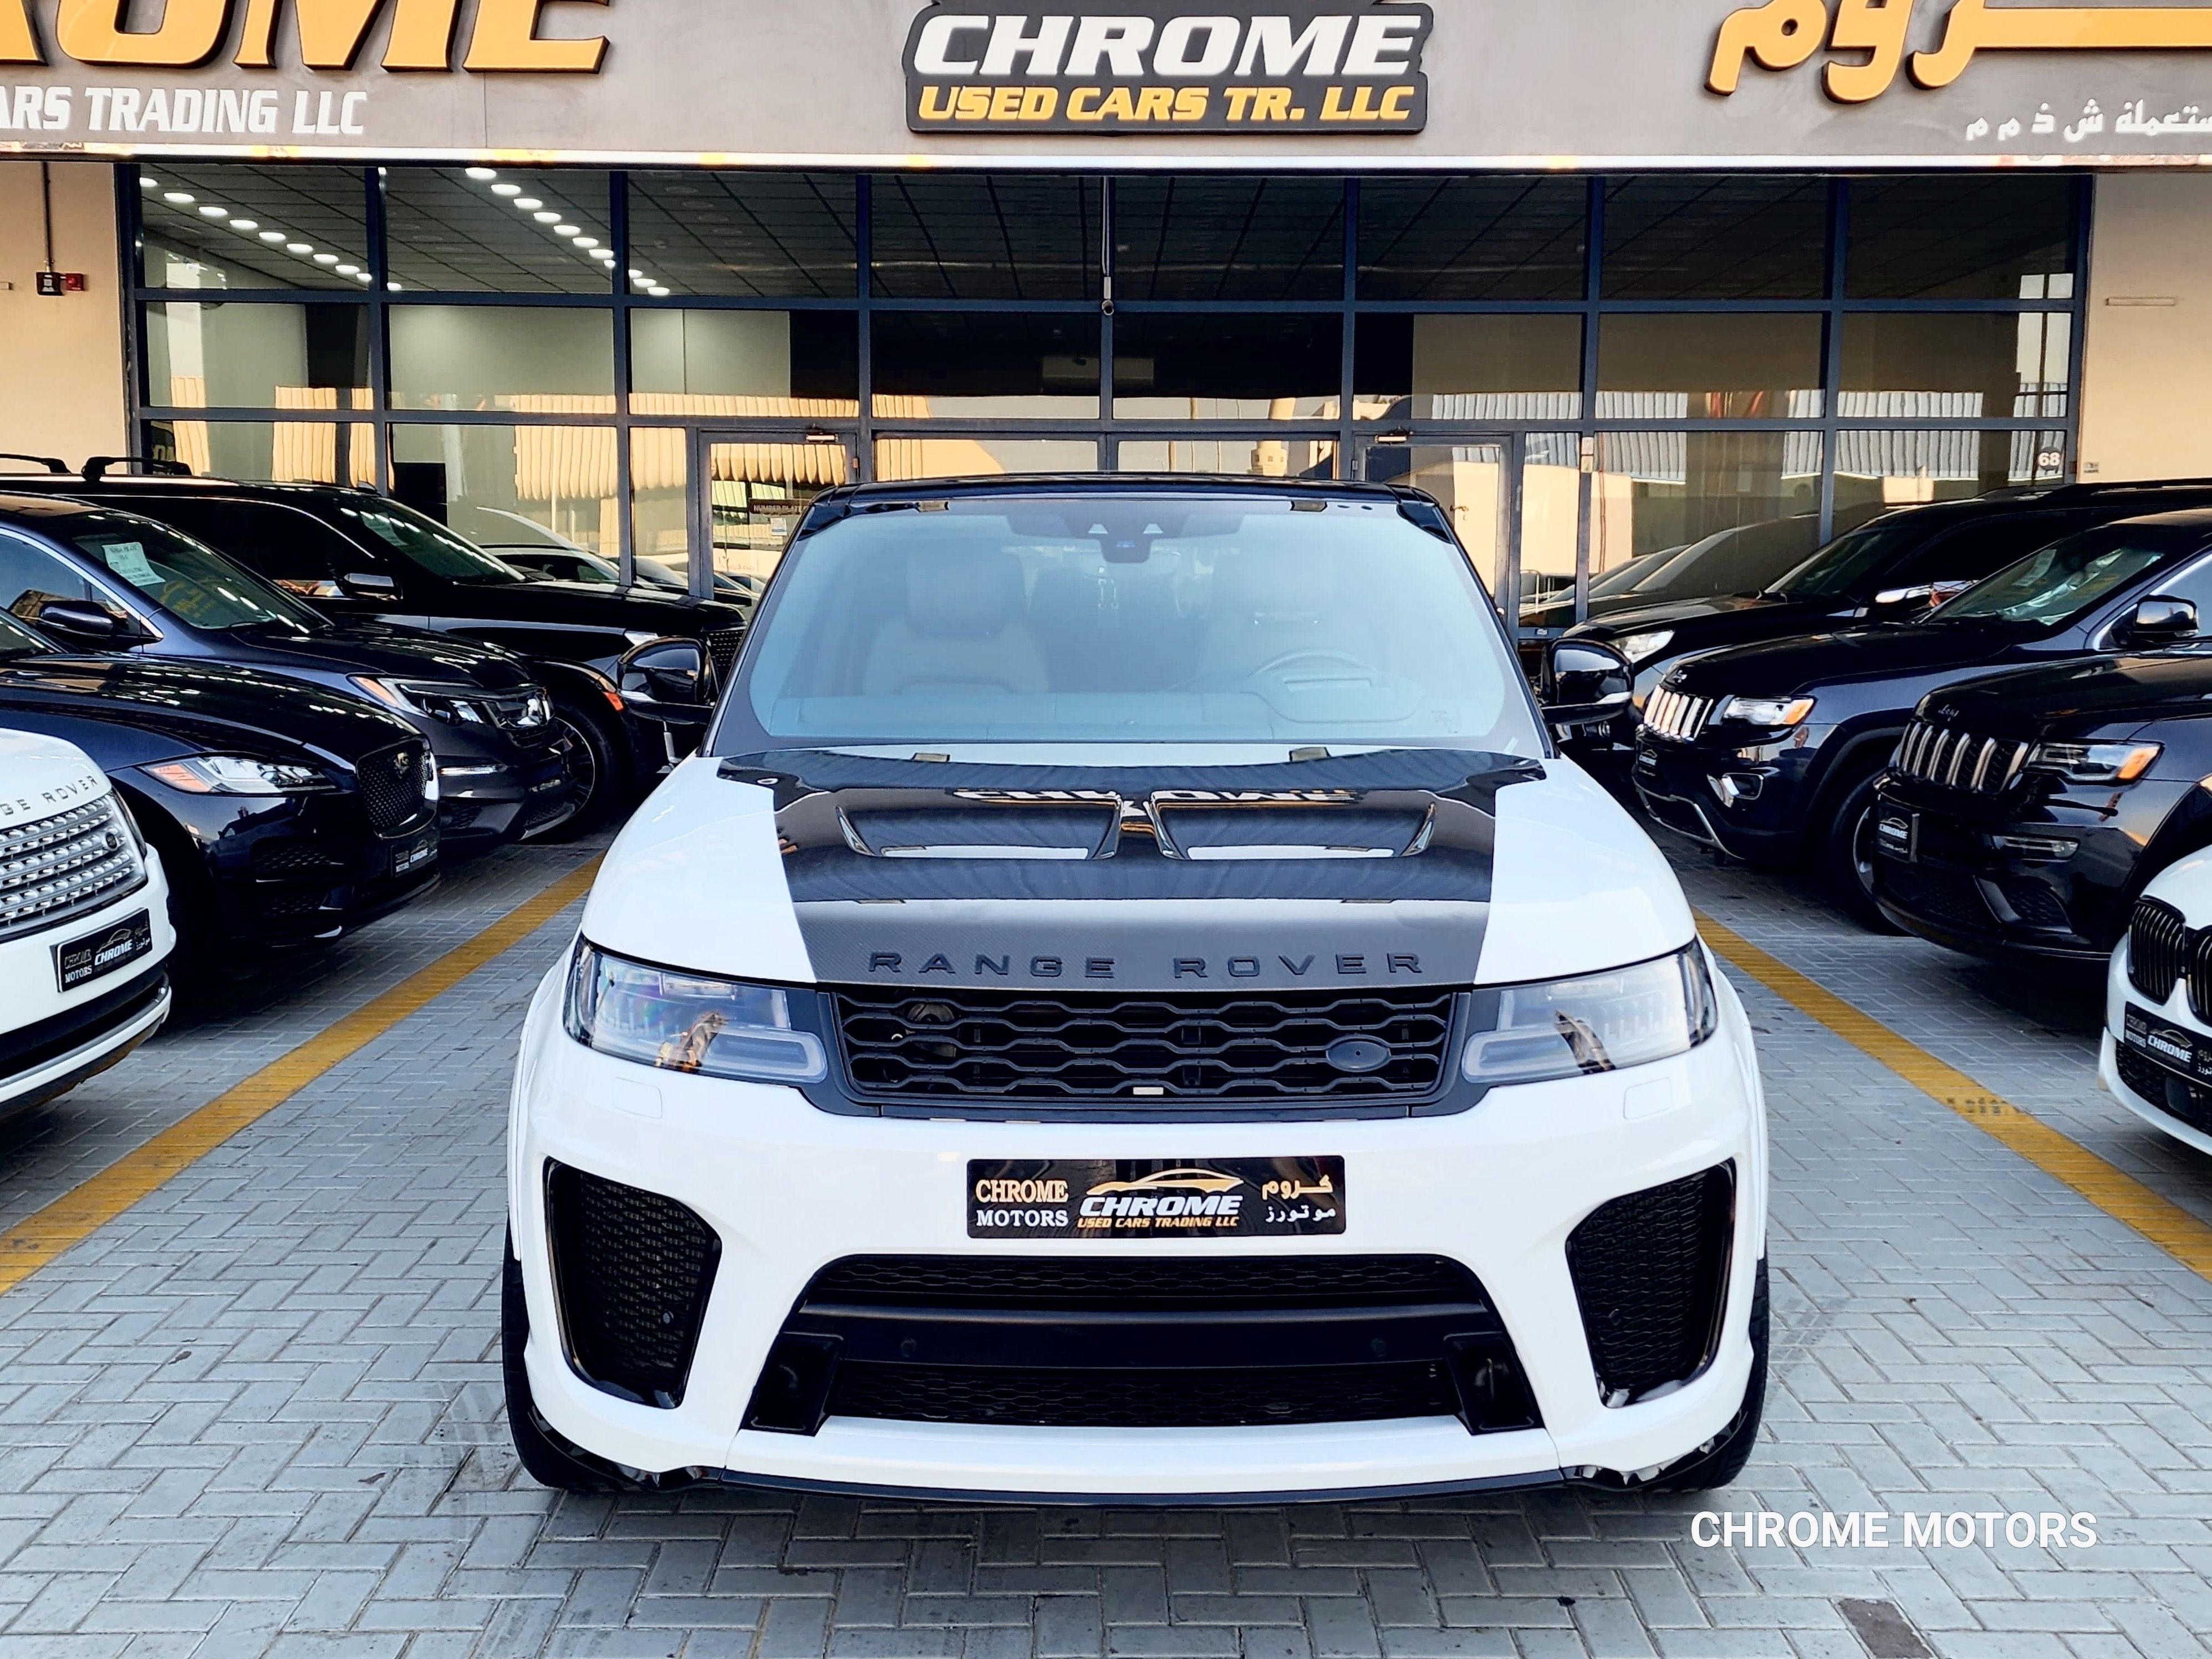 2019 LAND ROVER RANGE ROVER SPORT HSE, 5DR SUV, 3L 6CYL PETROL, AUTOMATIC, FOUR WHEEL DRIVE